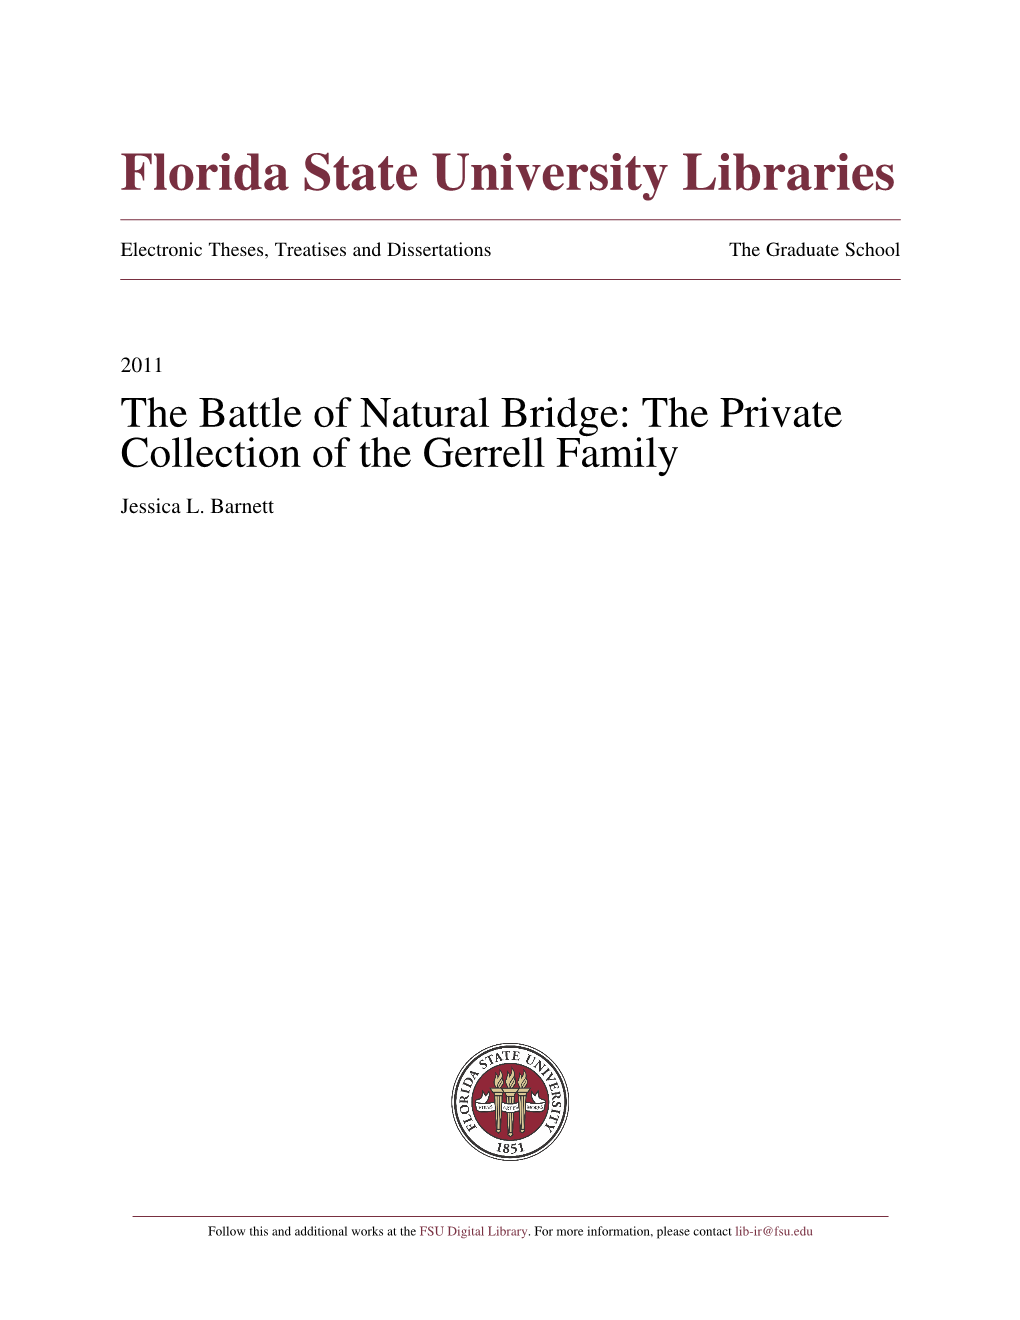 The Battle of Natural Bridge: the Private Collection of the Gerrell Family Jessica L